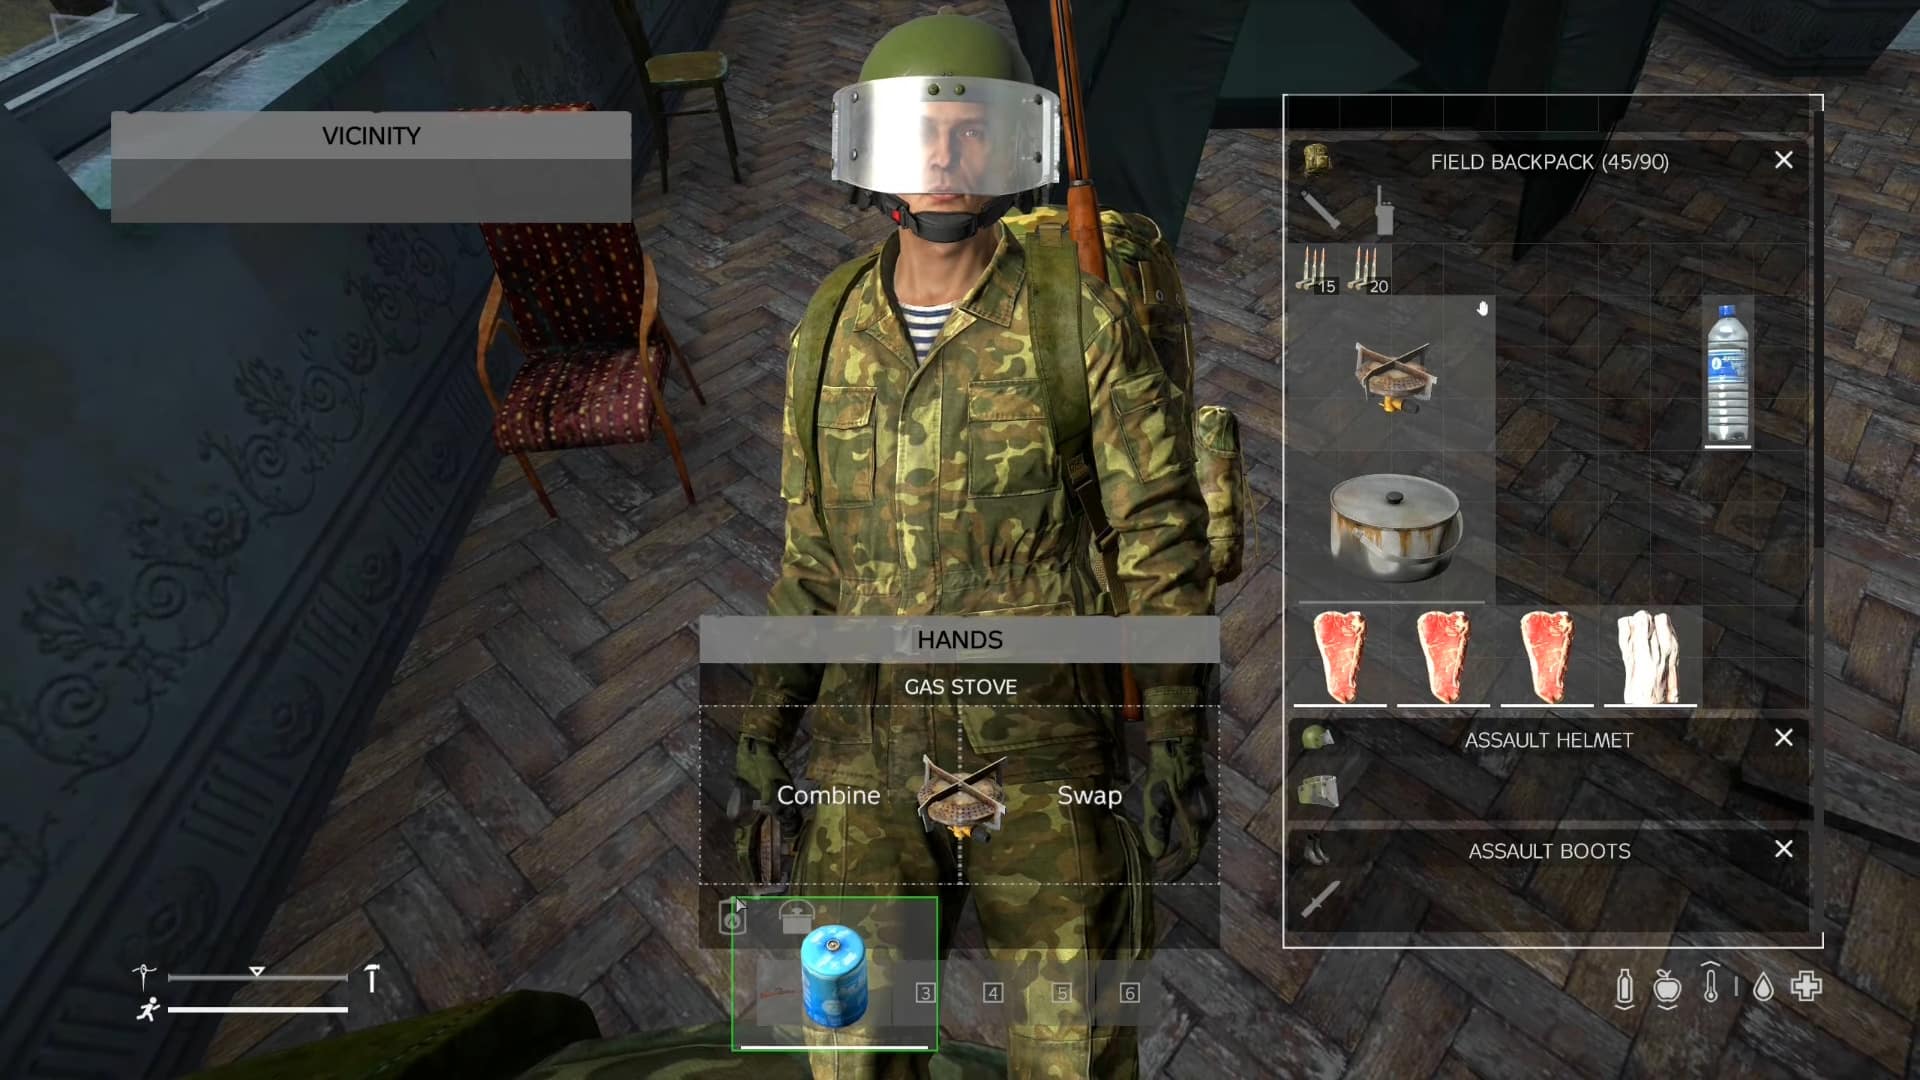 Combining the gas stove with gas cannister in DayZ crafting UI